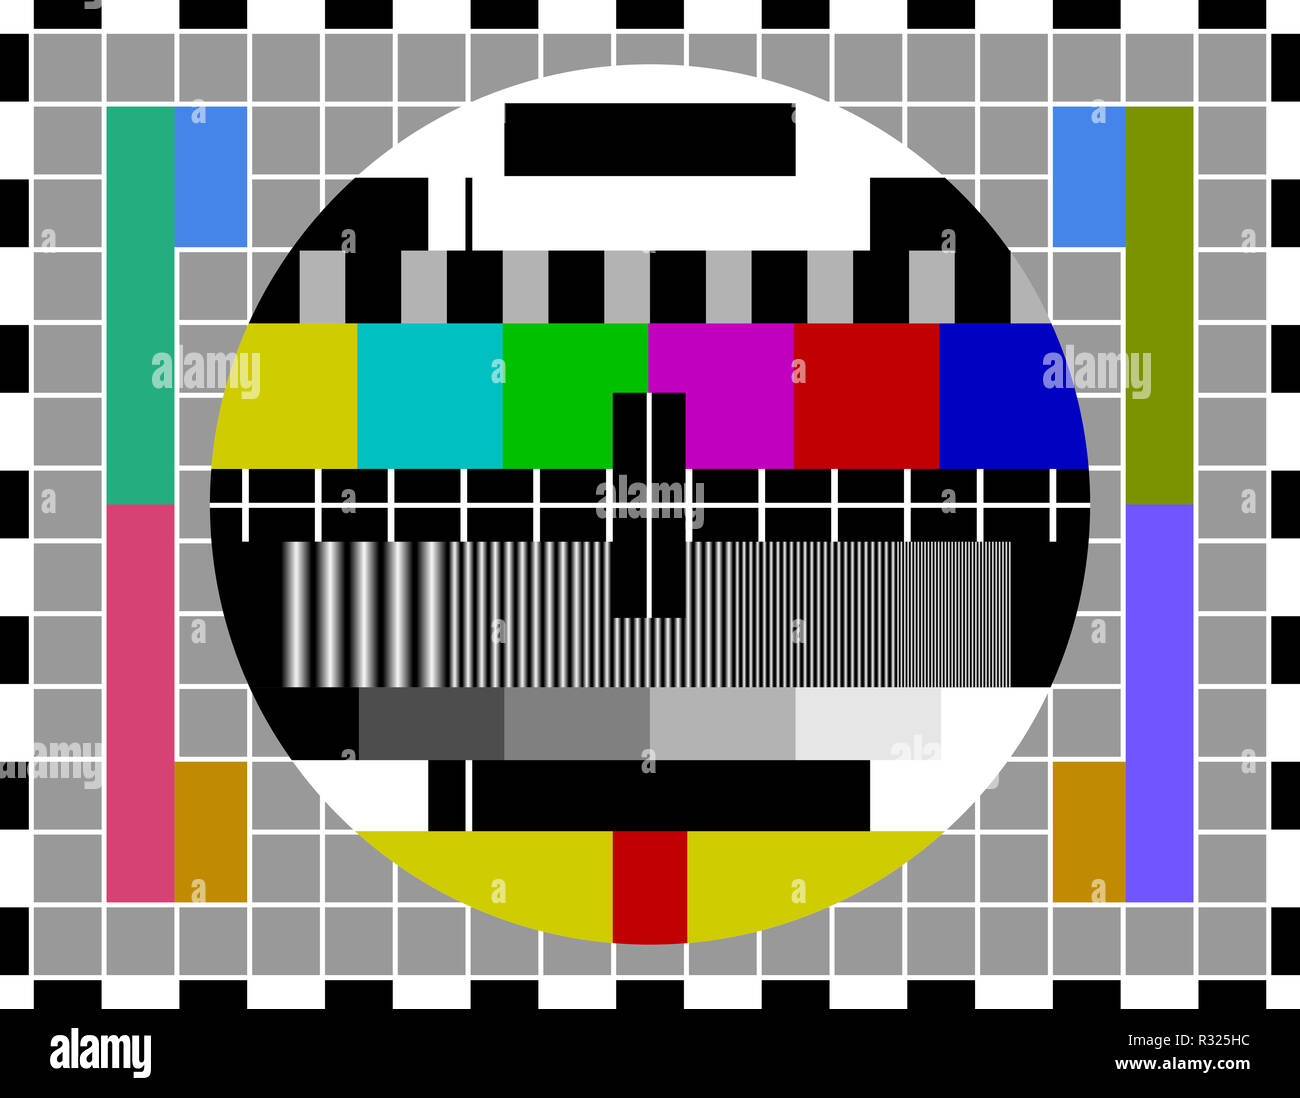 Broadcast Screen Test High Resolution Stock Photography And Images Alamy